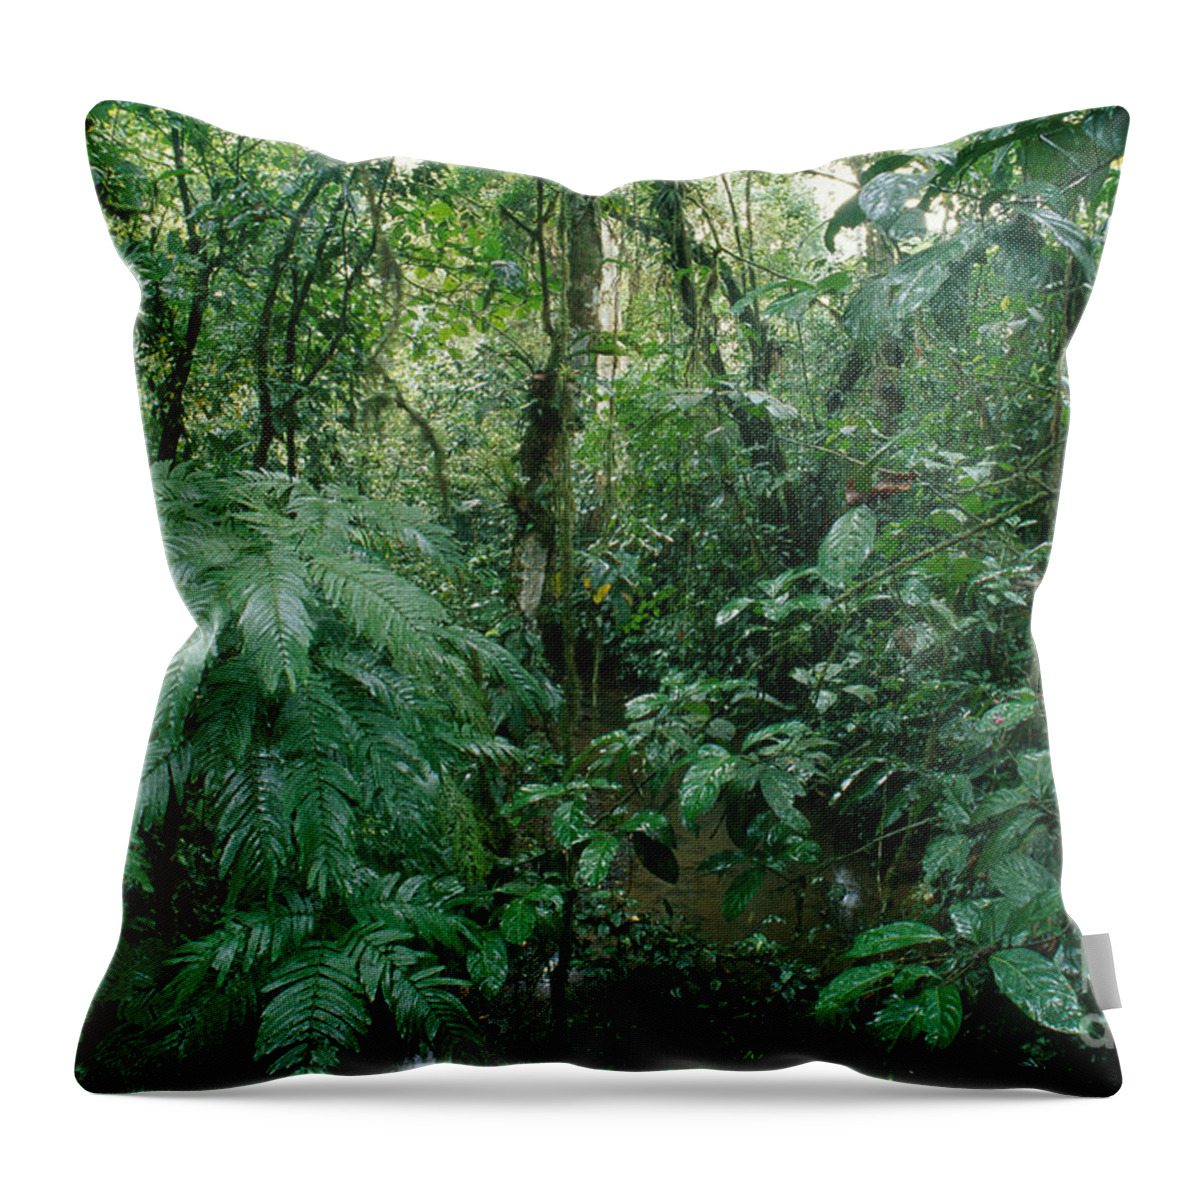 La Selva Biological Station Throw Pillow featuring the photograph La Selva, Costa Rica by Gregory G. Dimijian, M.D.